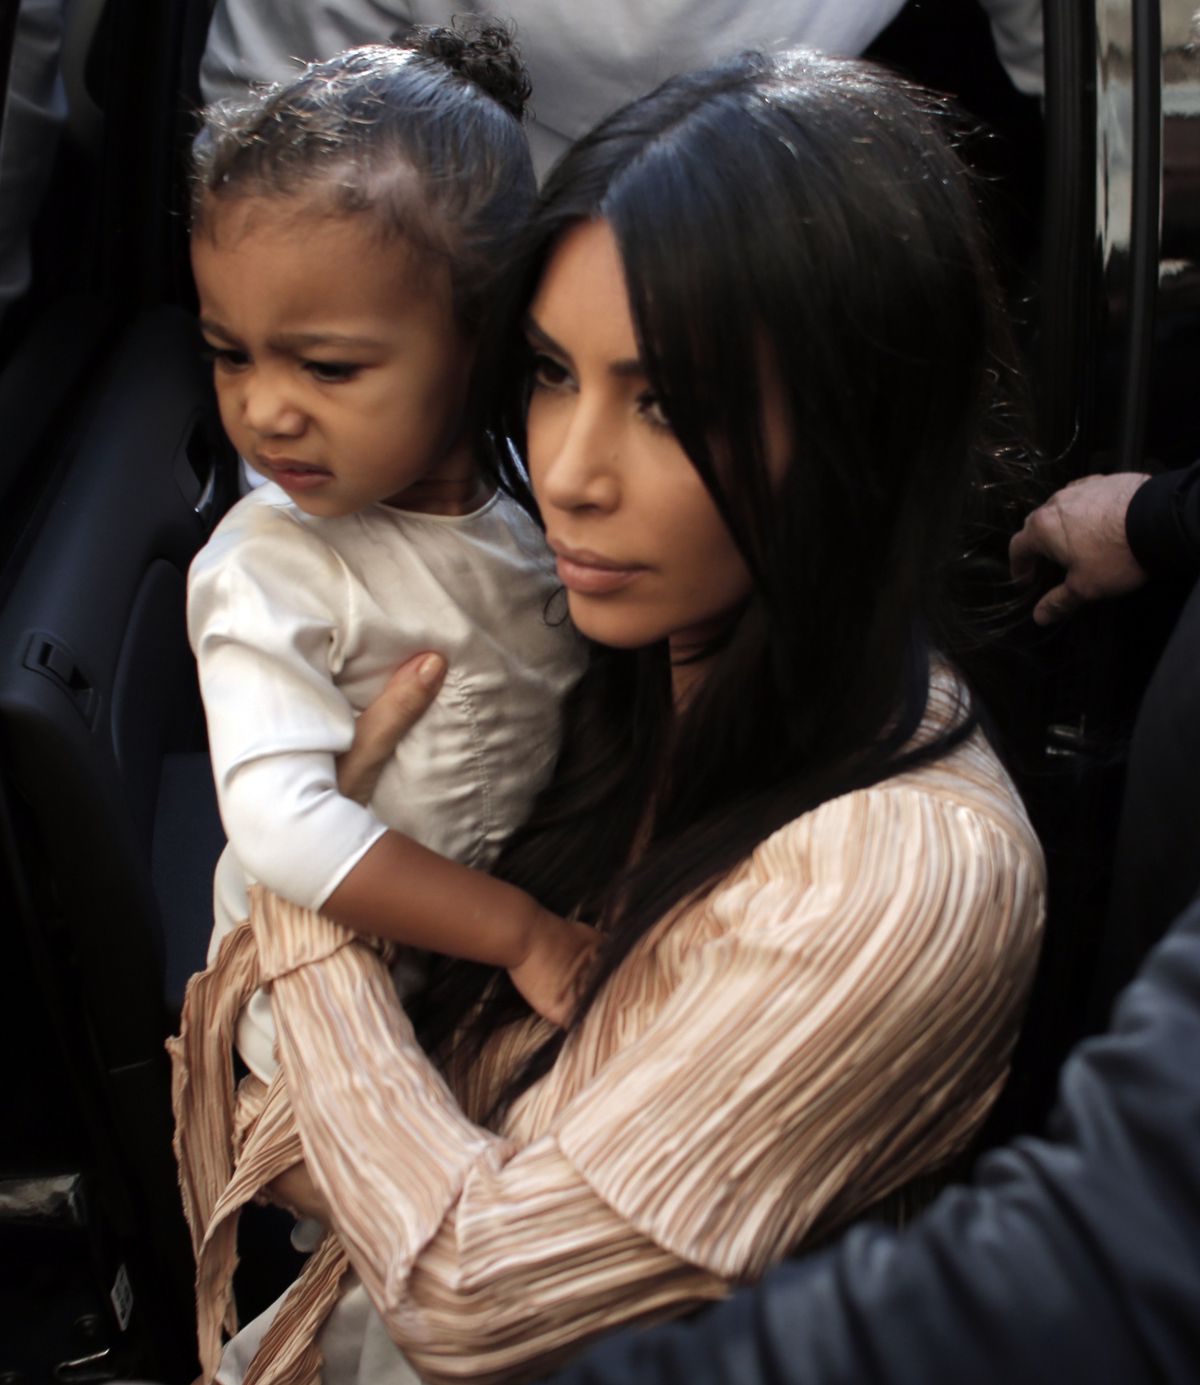 Kim Kardashian West carries her daughter North West as she and her husband rapper Kanye West (back) exit a car upon their arrival at the Armenian St. James Cathedral in Jerusalem’s Old City in 2015.